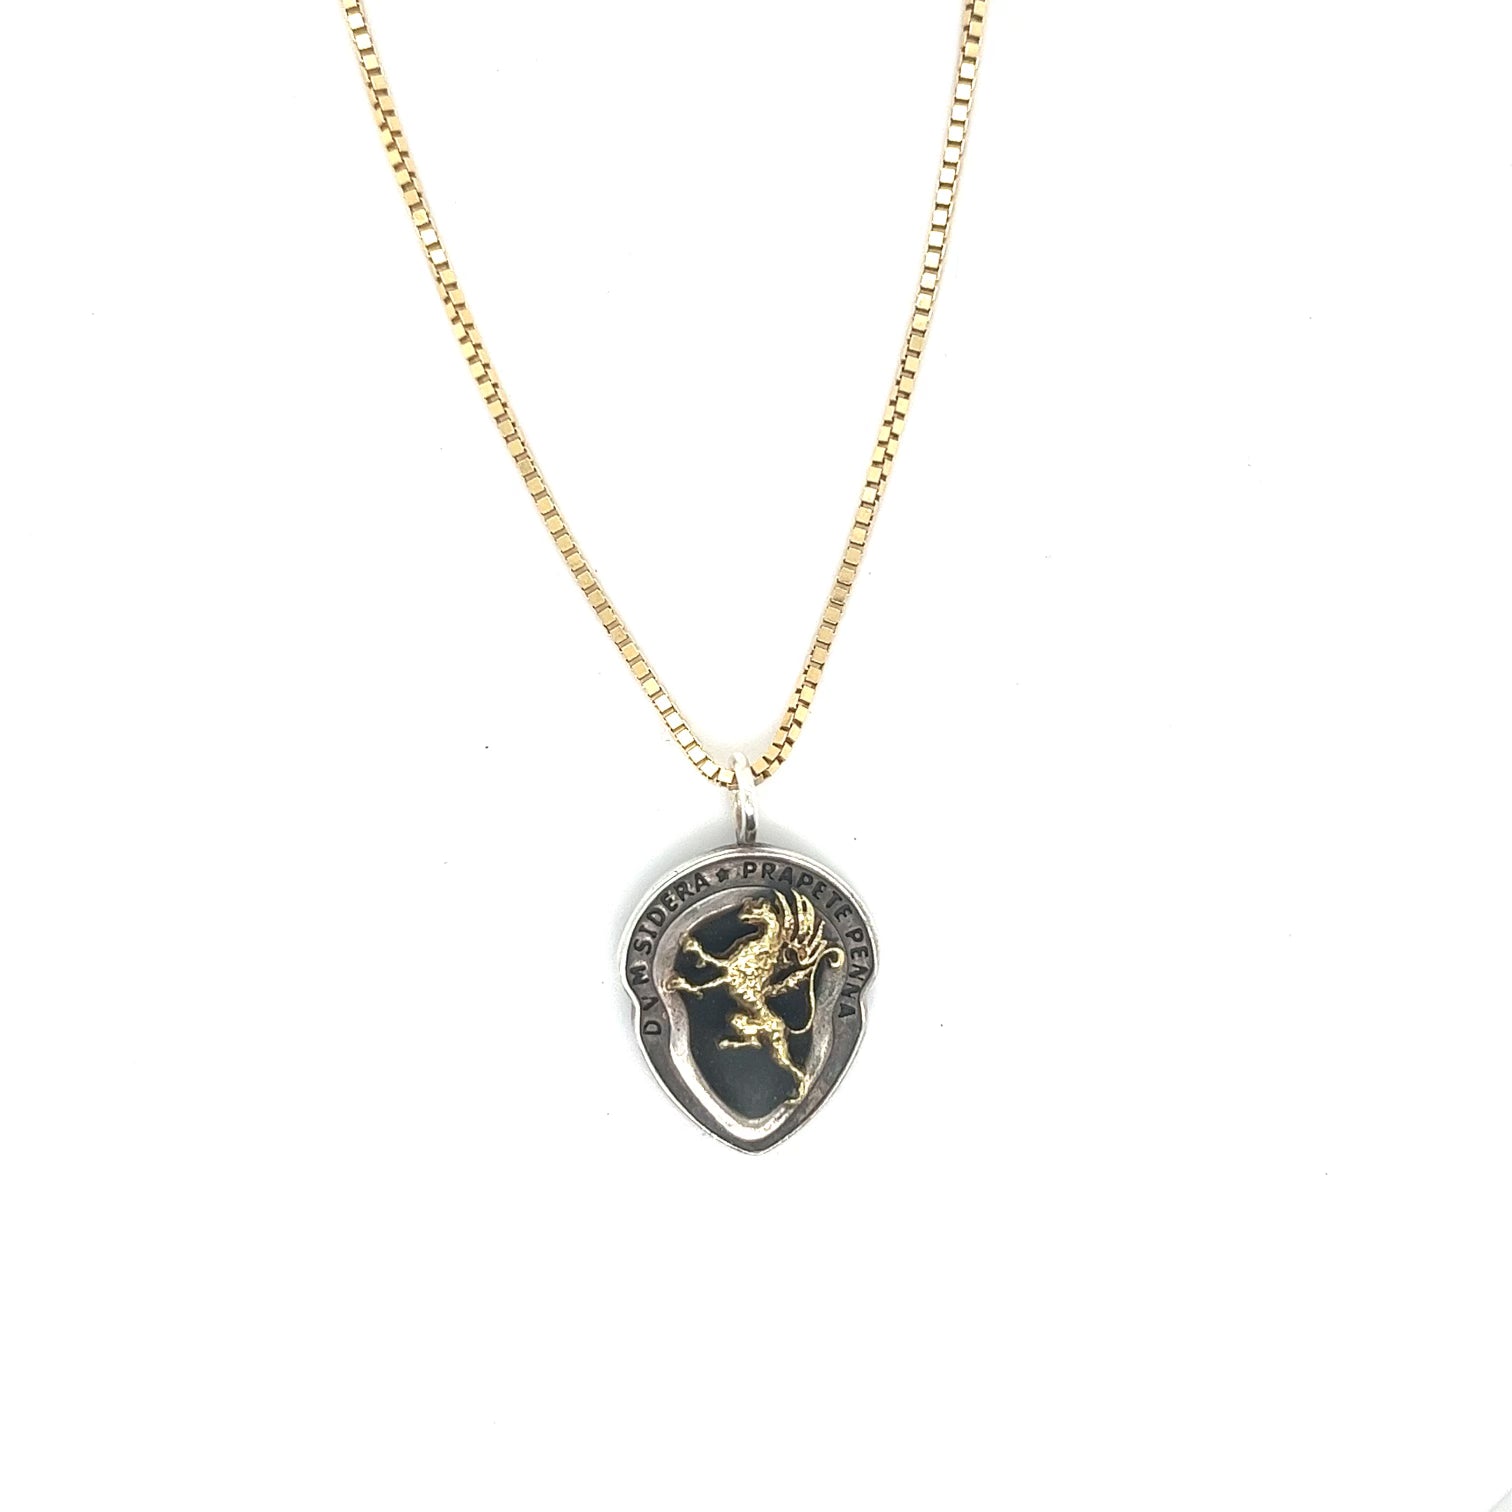 Griffin "Star Like With Wings" Charm 18kt Gold and Sterling Silver